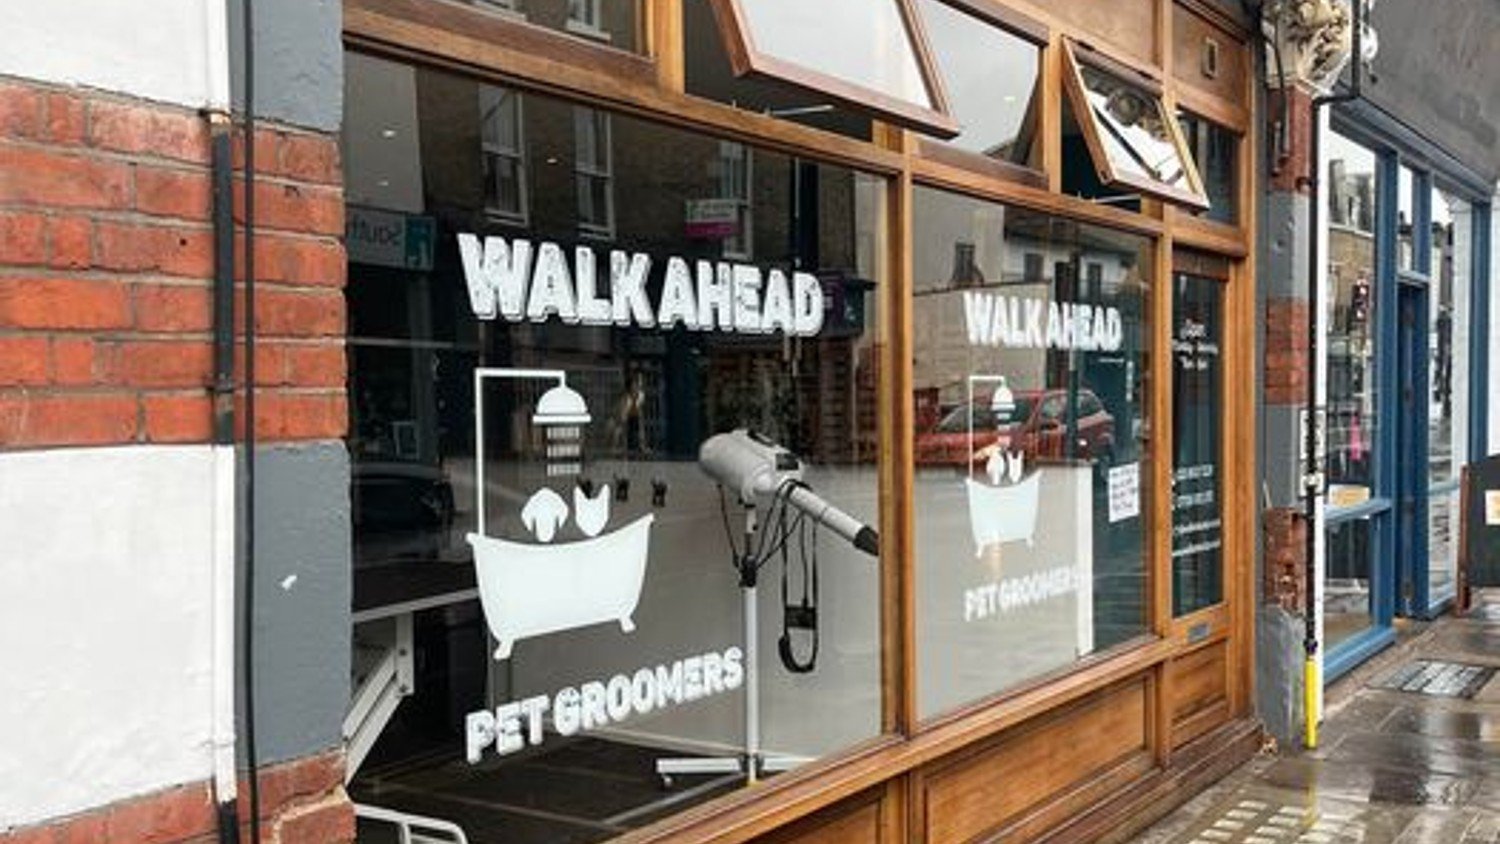 Crystal Palace welcomes new grooming salon